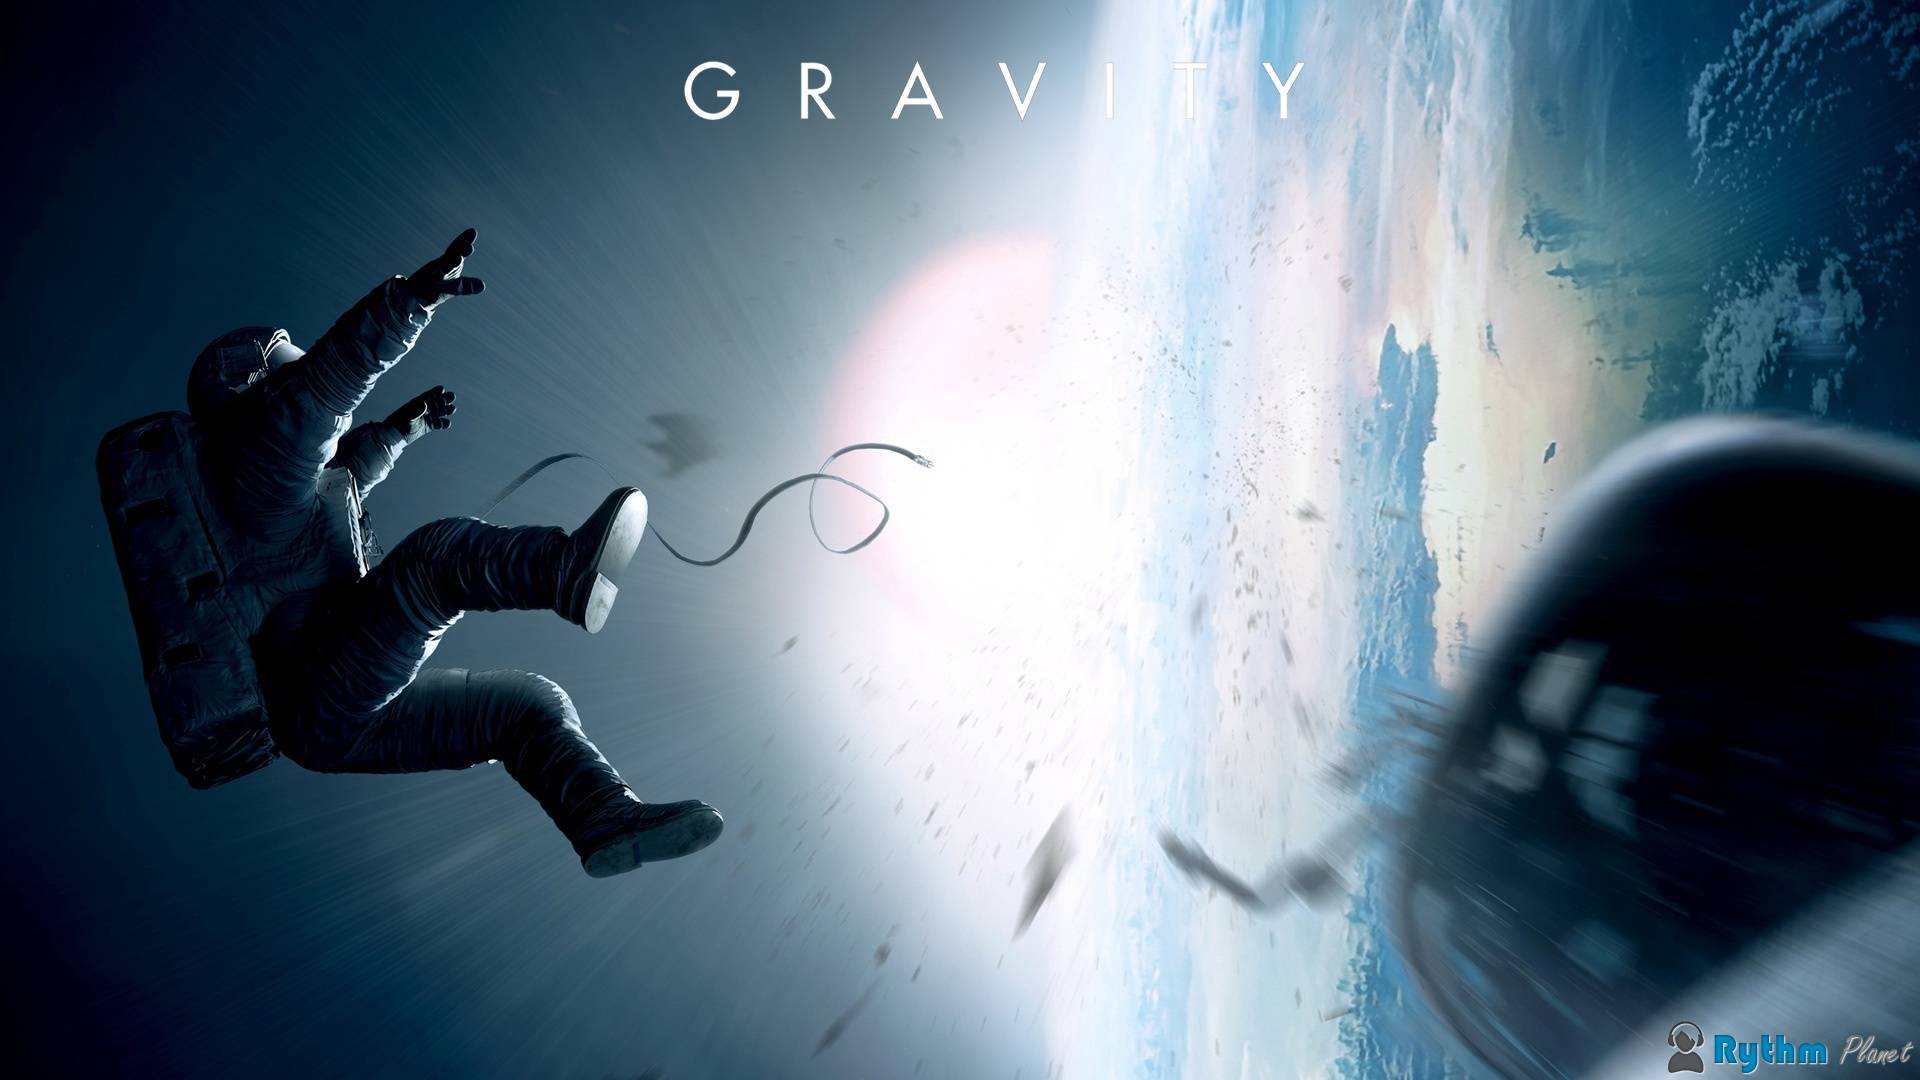 Gravity Wallpaper For Is An Uping